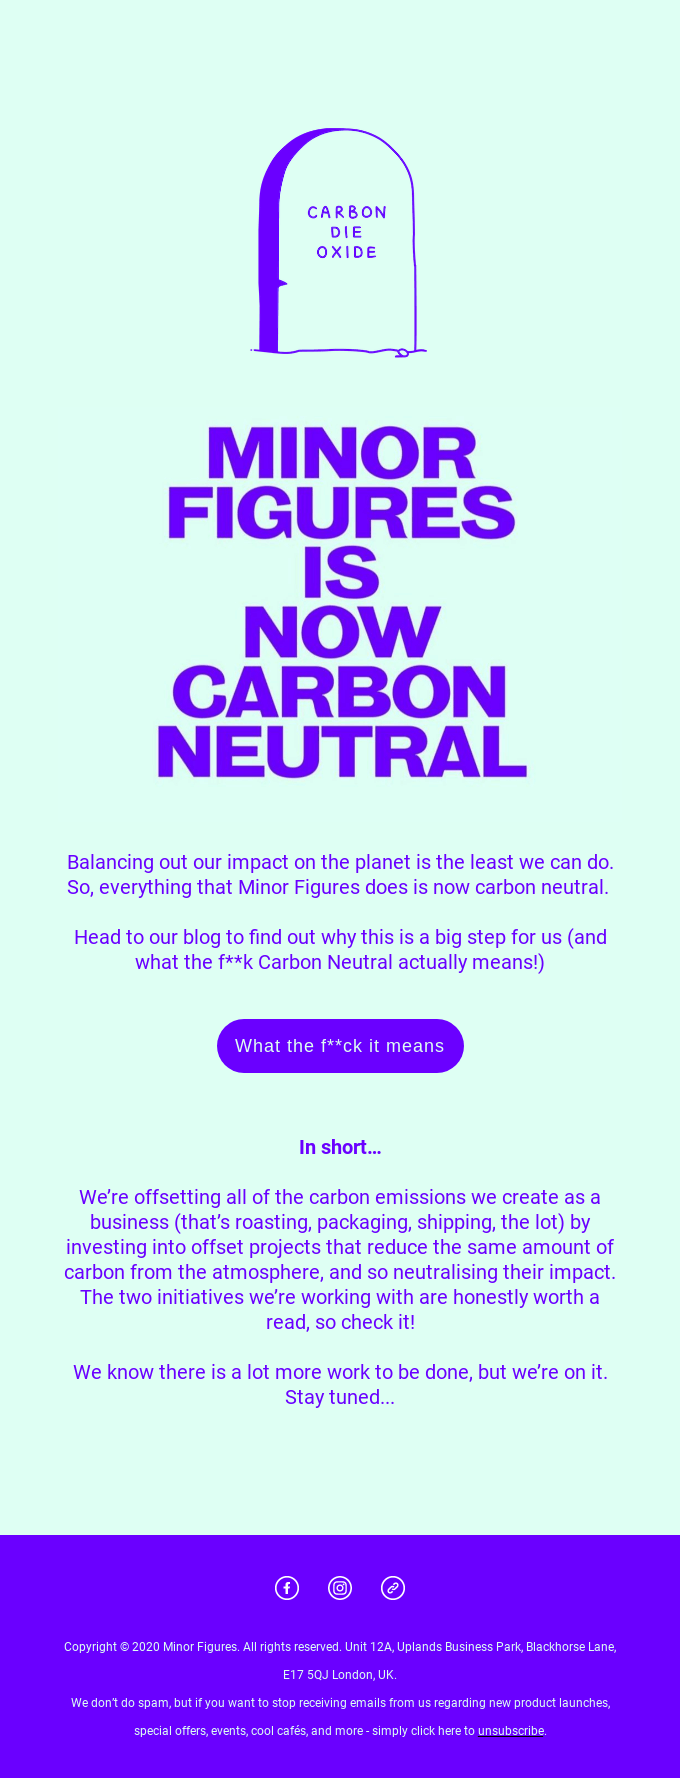 Minor Figures is now carbon neutral!